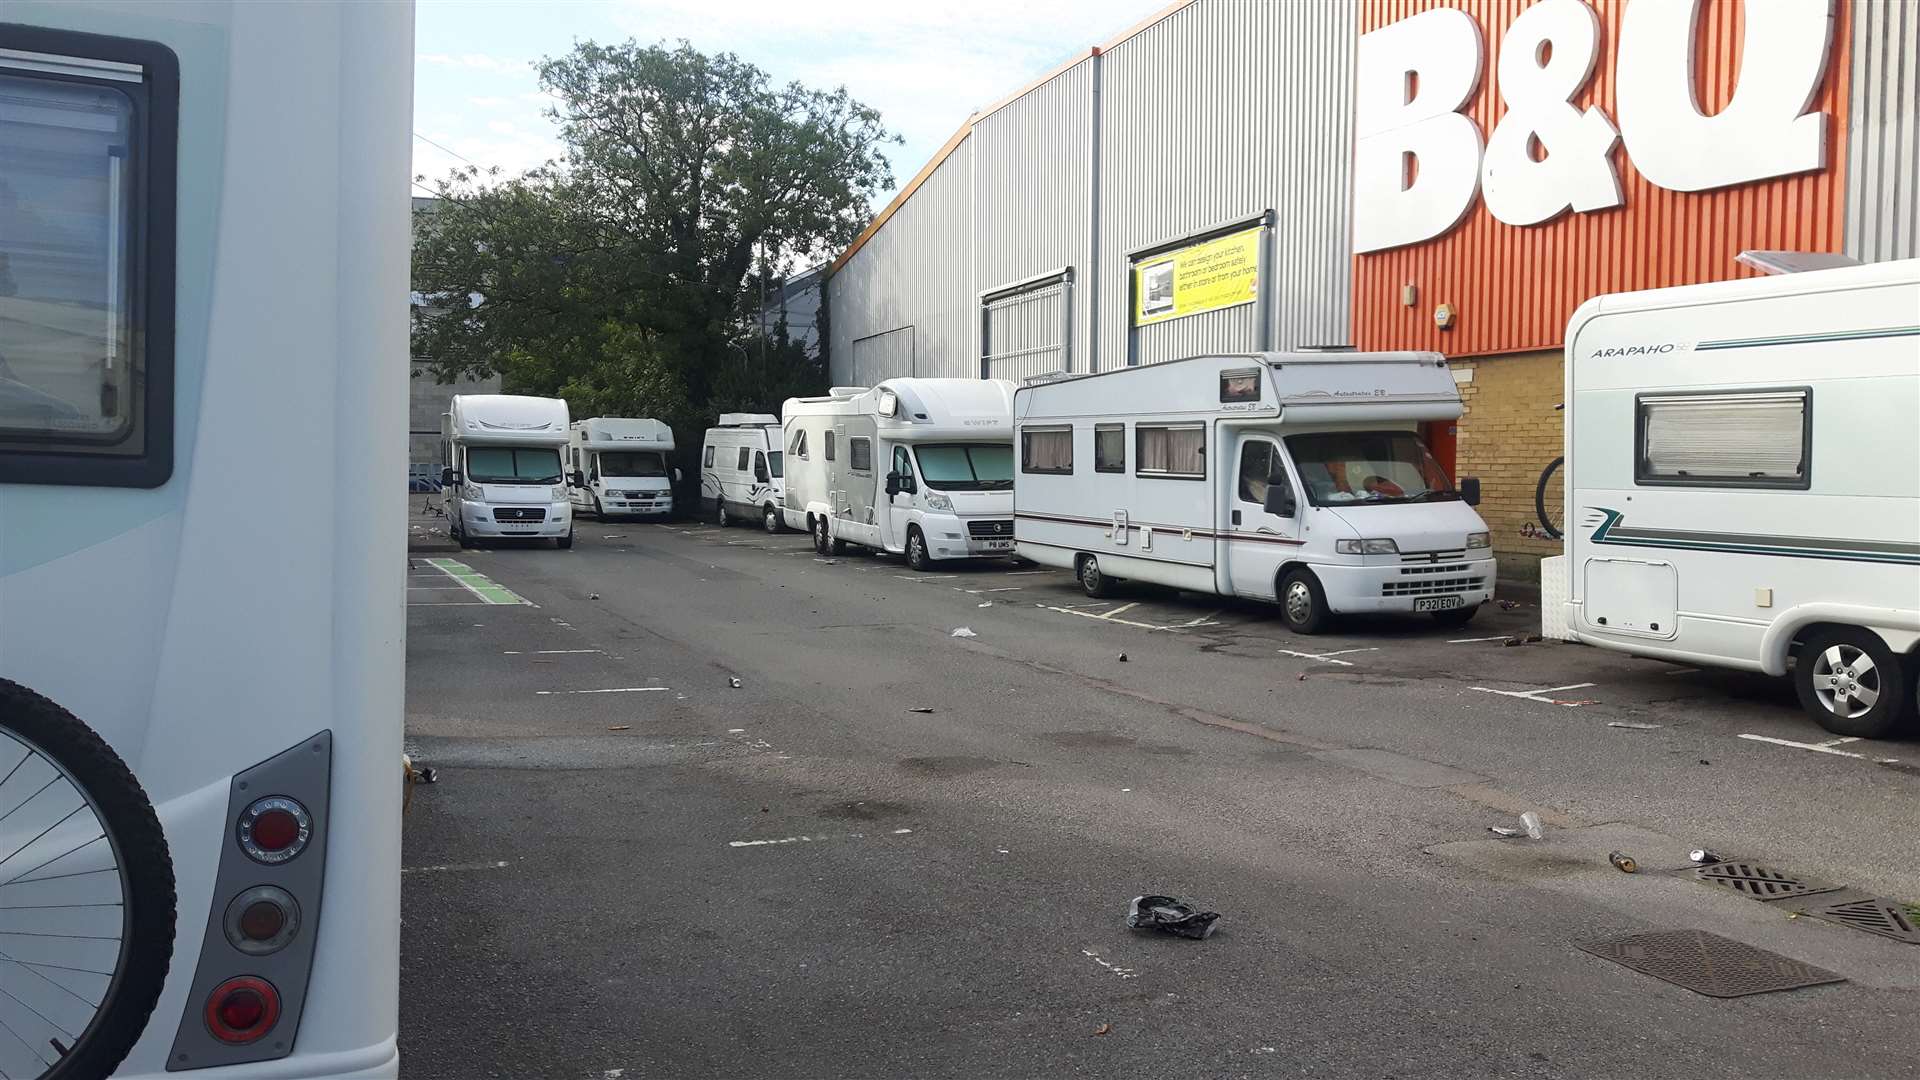 Motorhomes in the car park next to Maidstone's B&Q